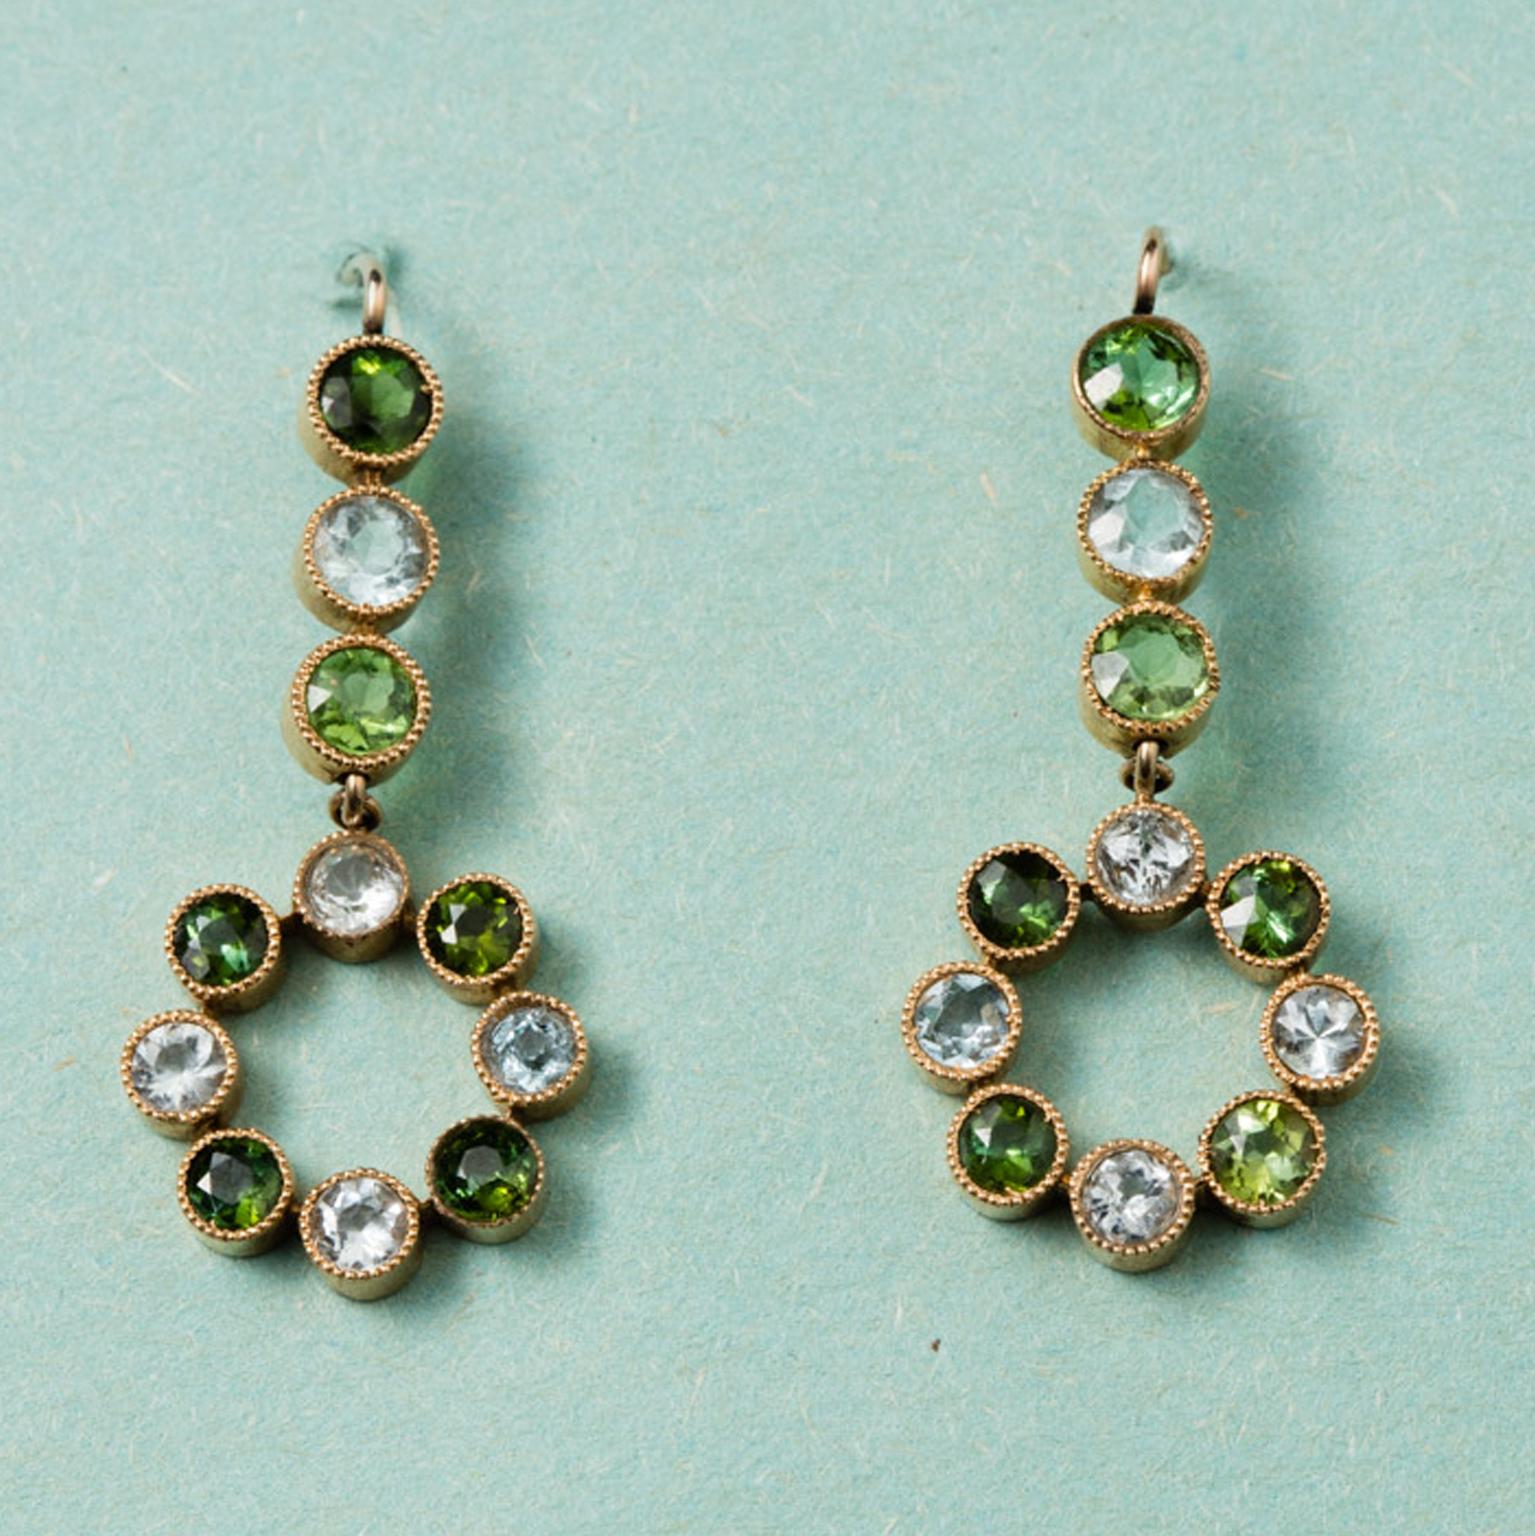 A pair of 15 carat gold earrings with a circle where round aquamarines alternate green tourmalines, circa 1910, England.

weight: 5.7 grams
dimensions: 3.7 x 1.5 cm